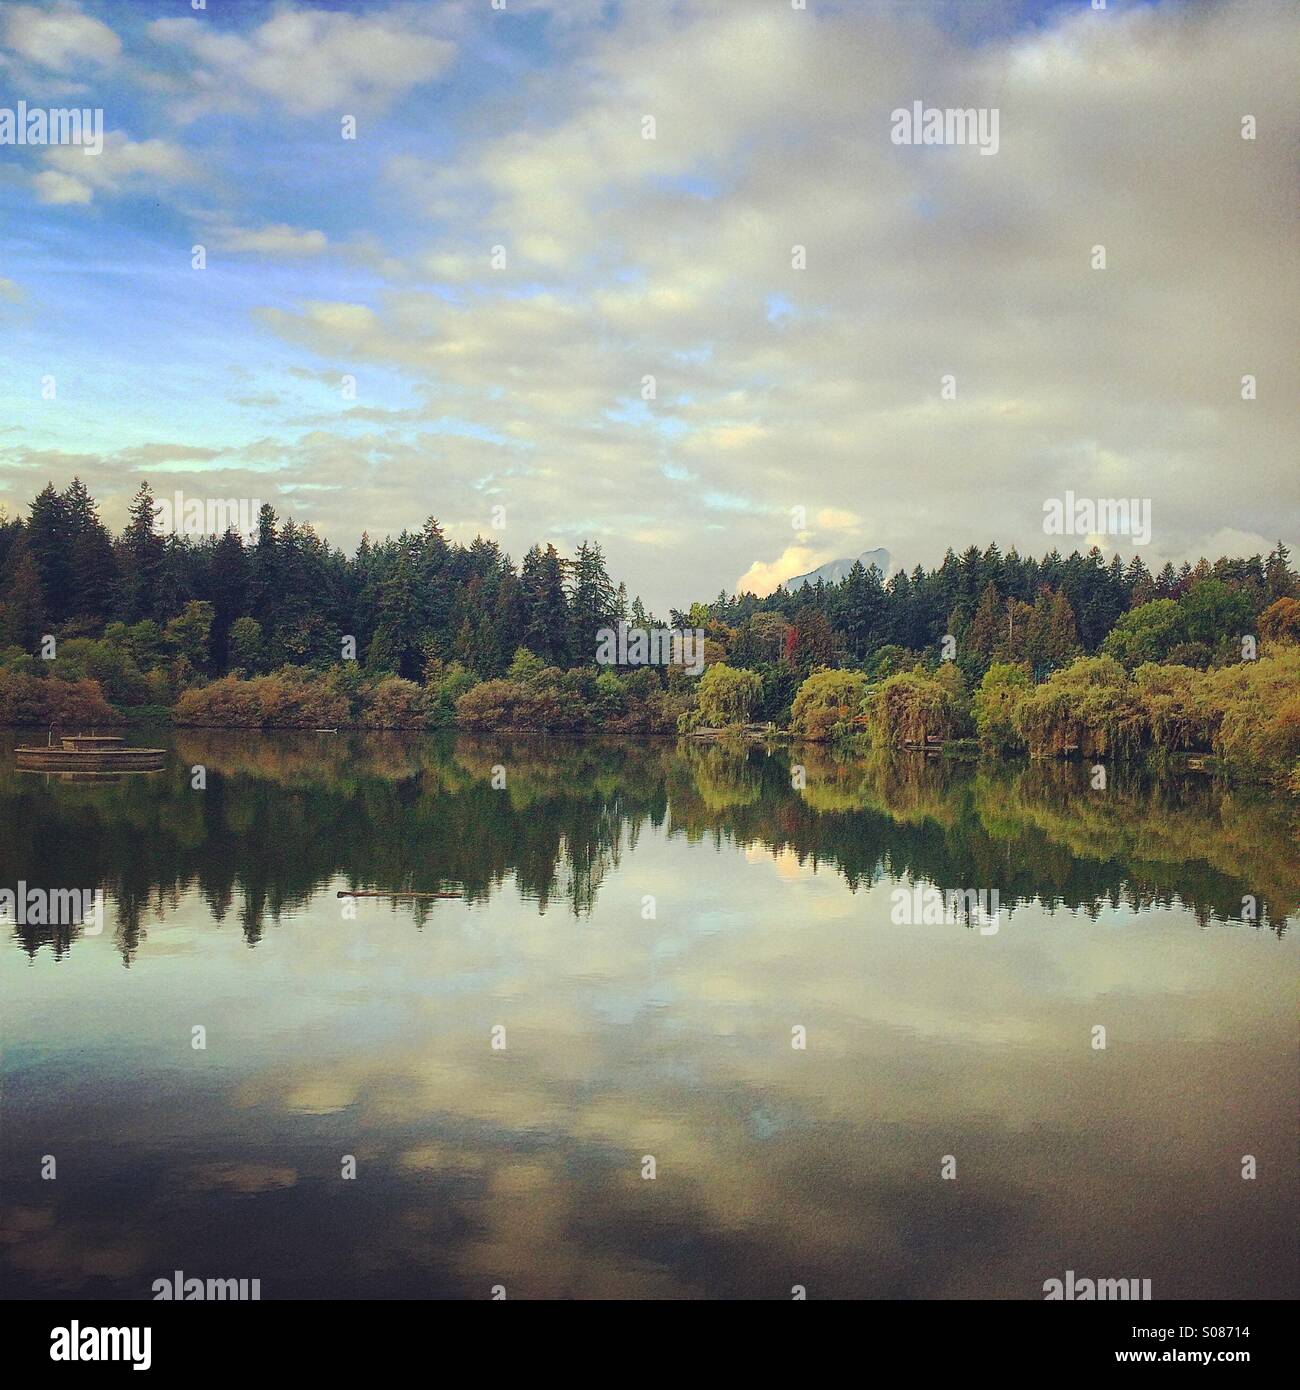 Reflection on Lost Lagoon in Stanley Park in Vancouver, BC. Stock Photo